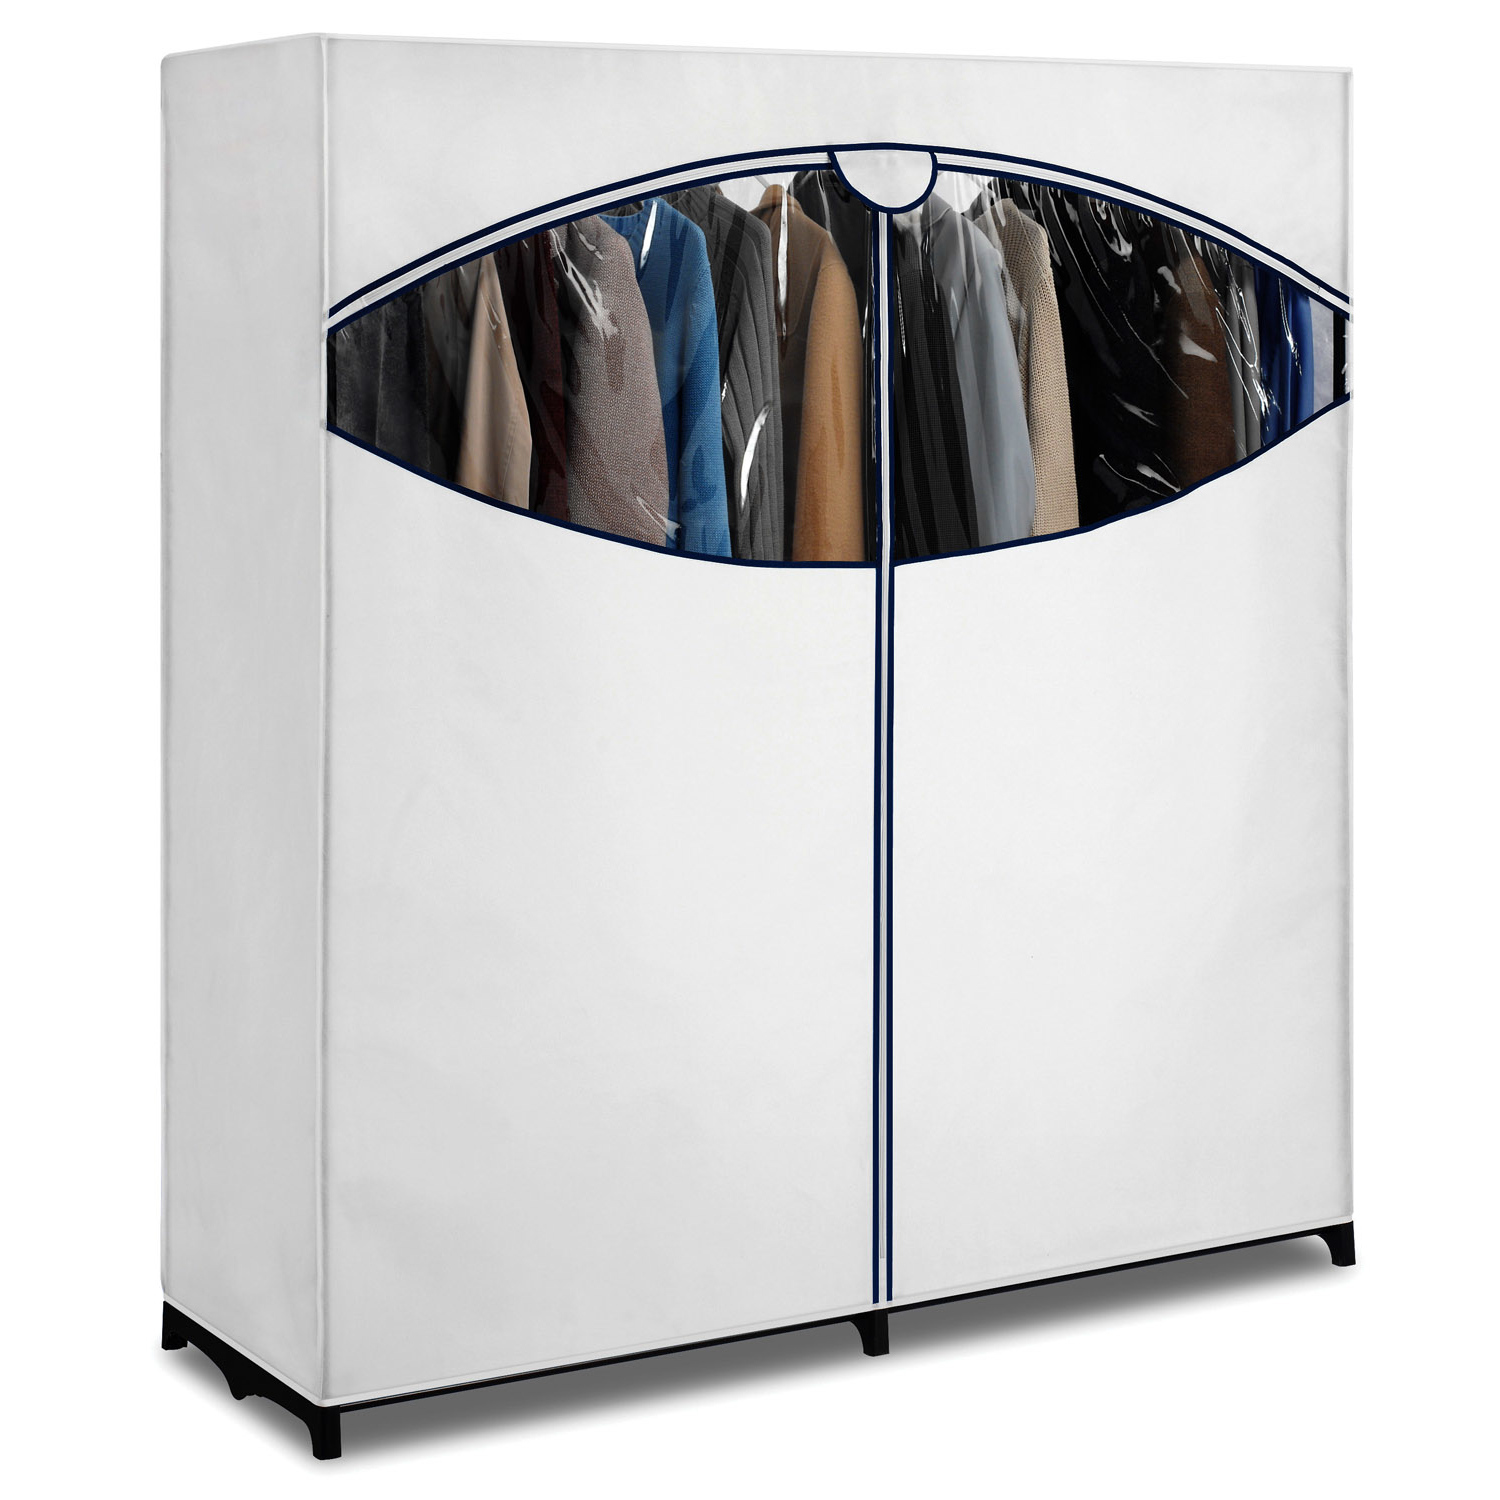 Whitmor Extra-Wide 60-inch Polypropylene Clothes Closet with White Cover - image 1 of 5